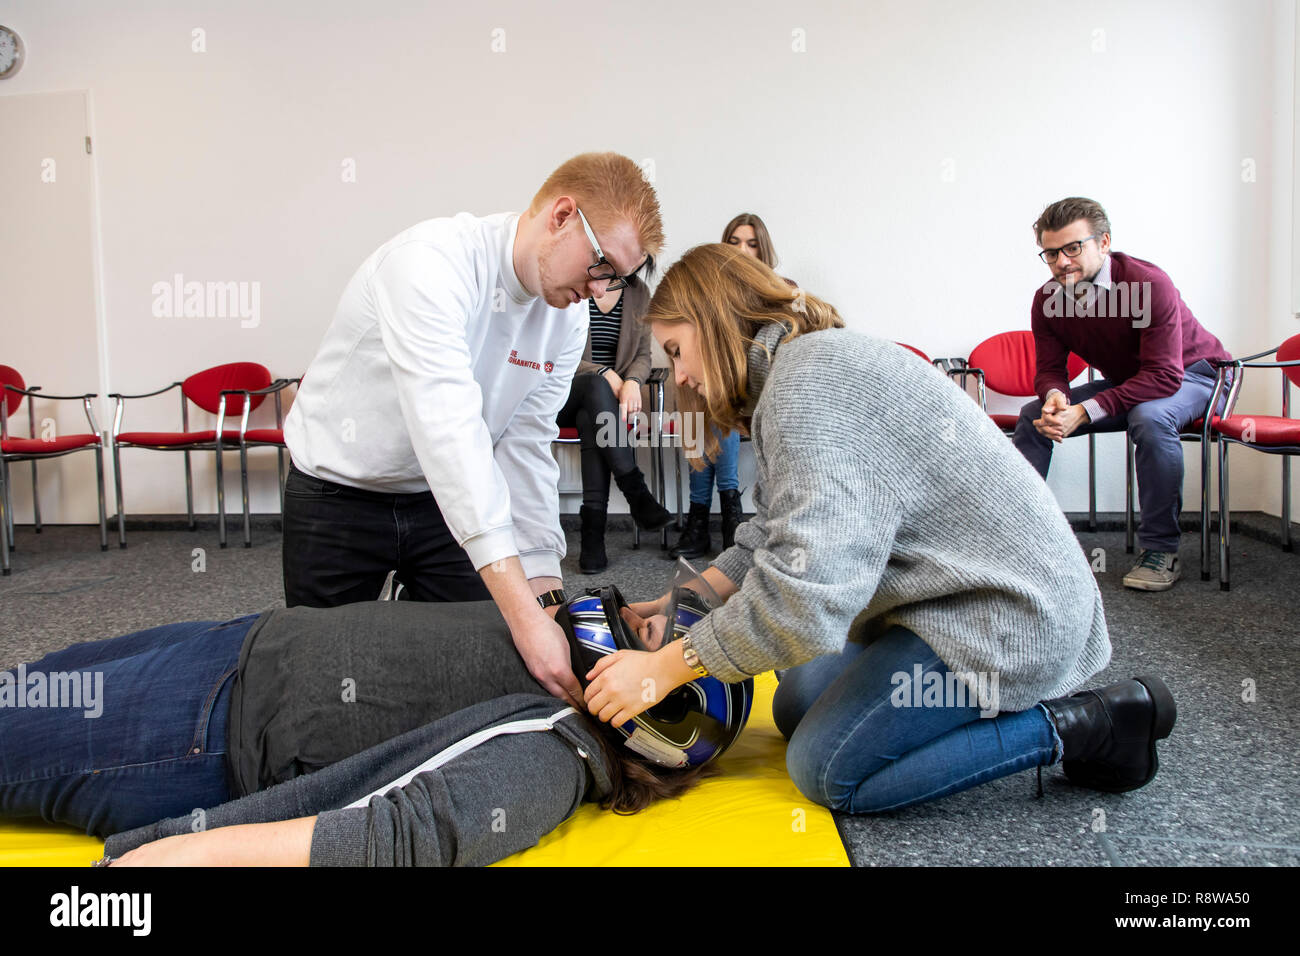 First aid course, first aid training in case of accidents, emergencies, practice training, proper removal of the safety helmet in the case of an accid Stock Photo